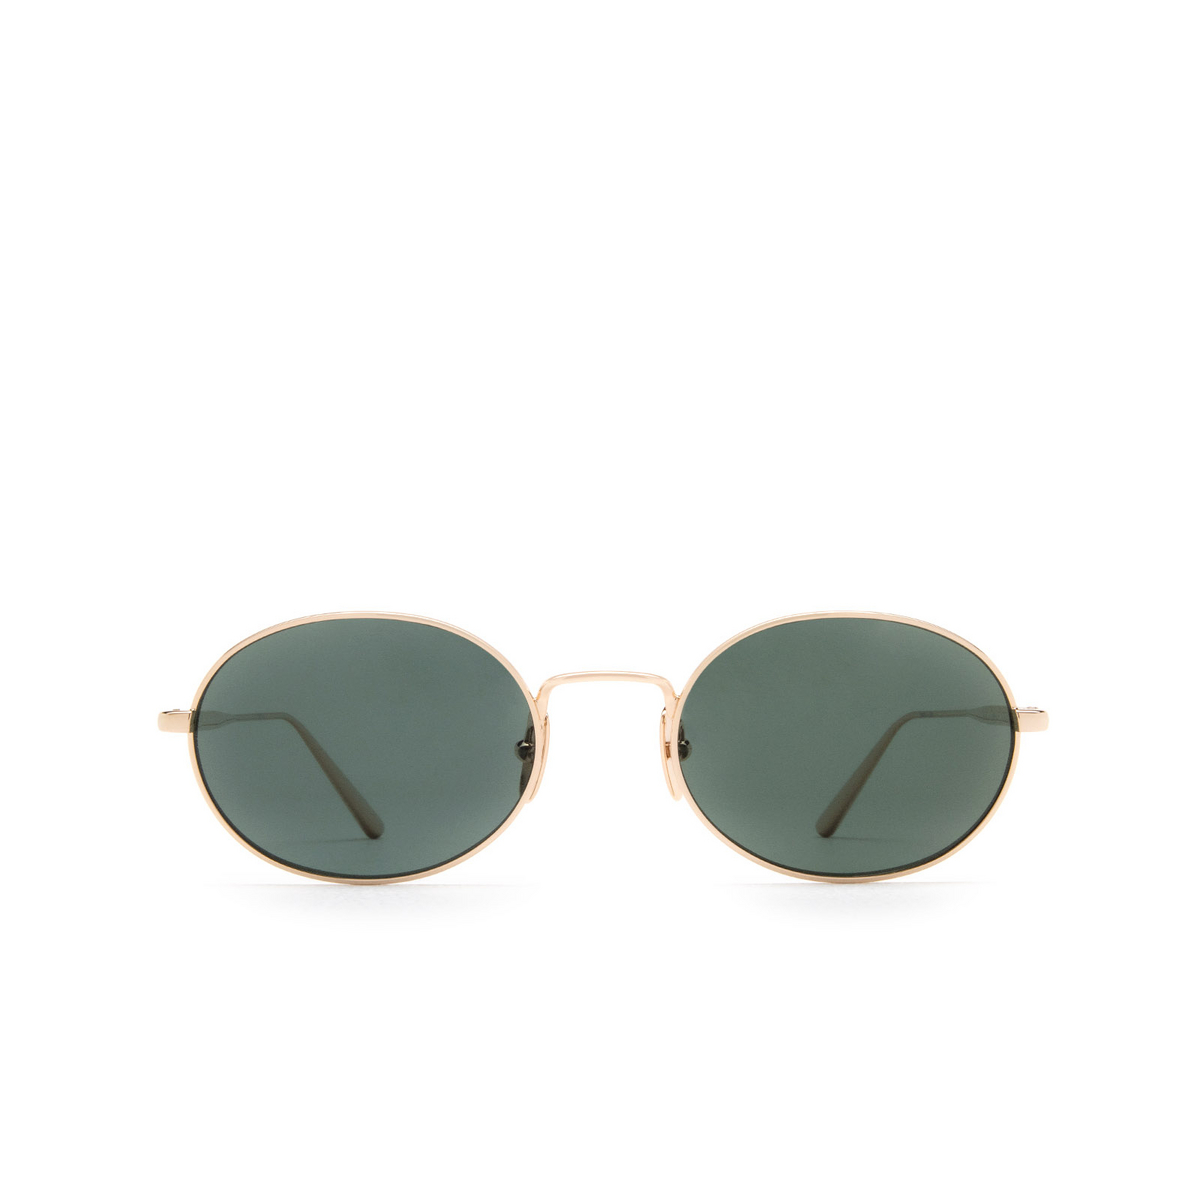 Chimi OVAL Sunglasses GREEN - front view